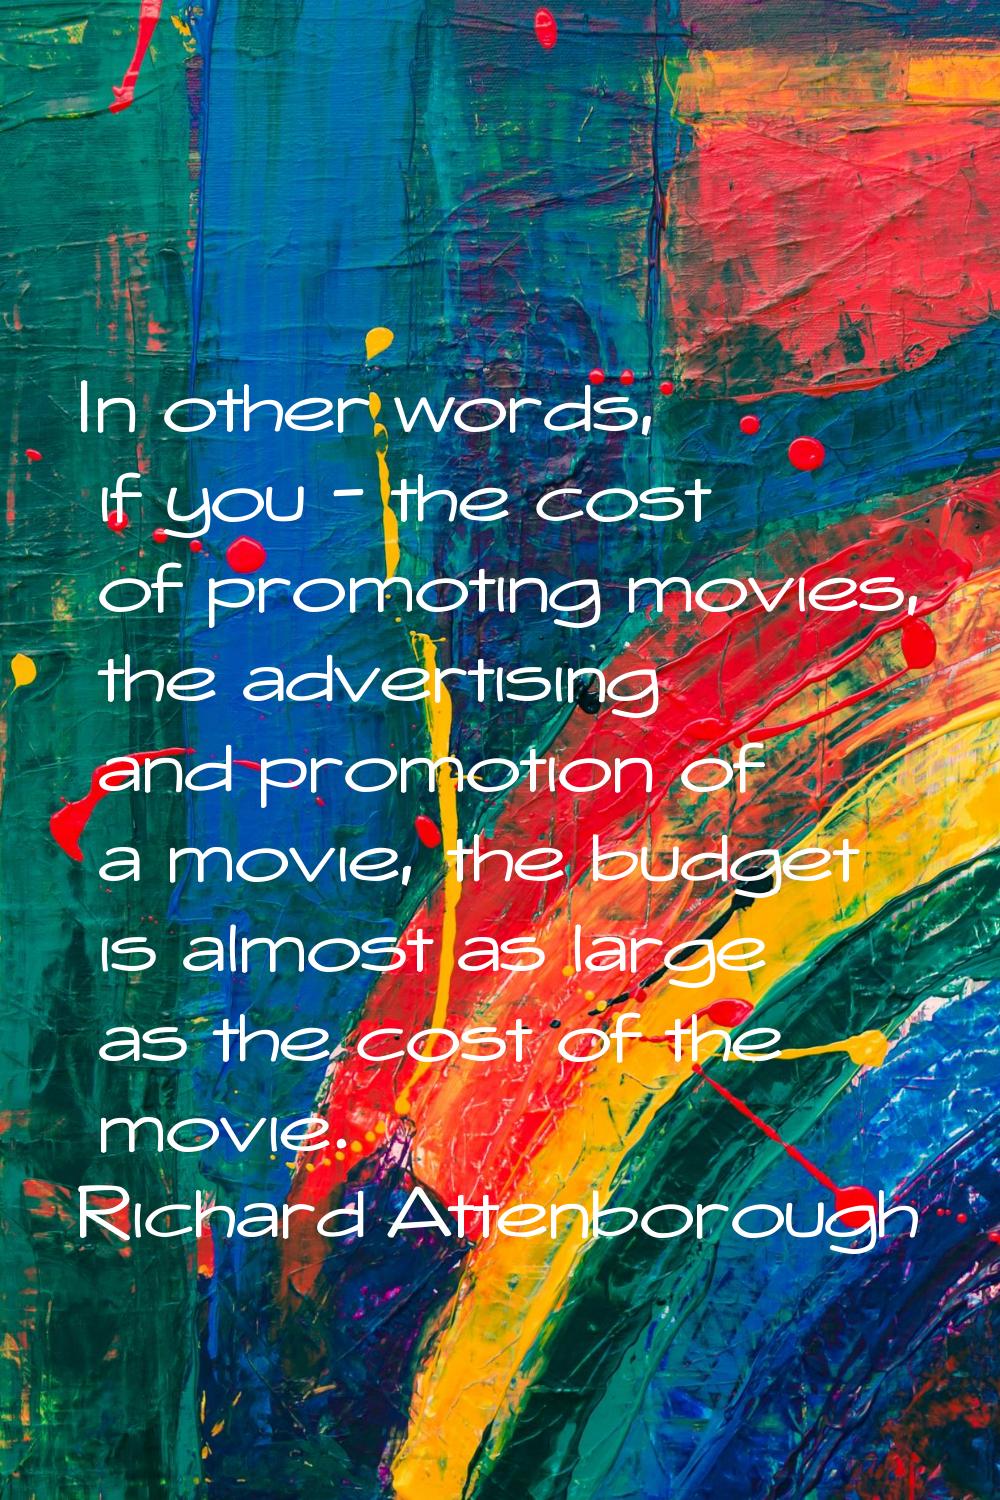 In other words, if you - the cost of promoting movies, the advertising and promotion of a movie, th